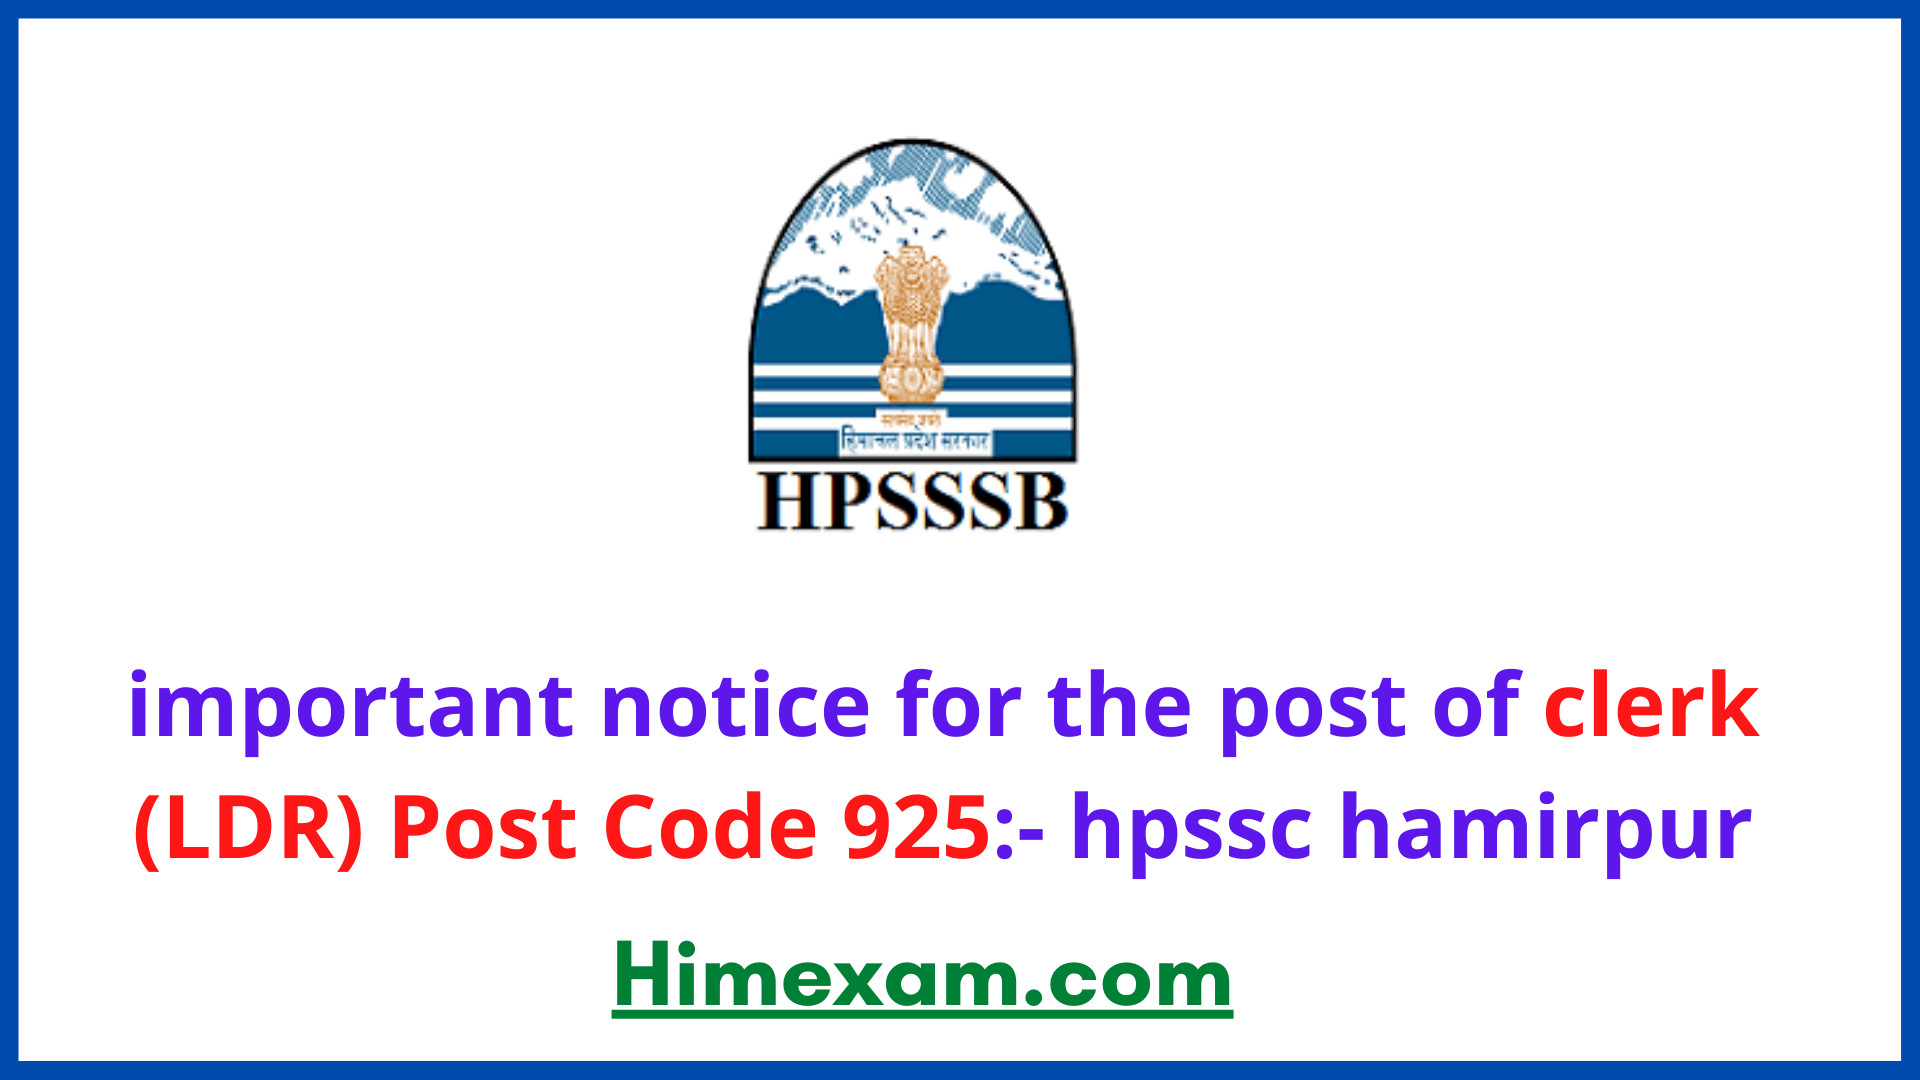 important notice for the post of clerk (LDR) Post Code 925:- hpssc hamirpur